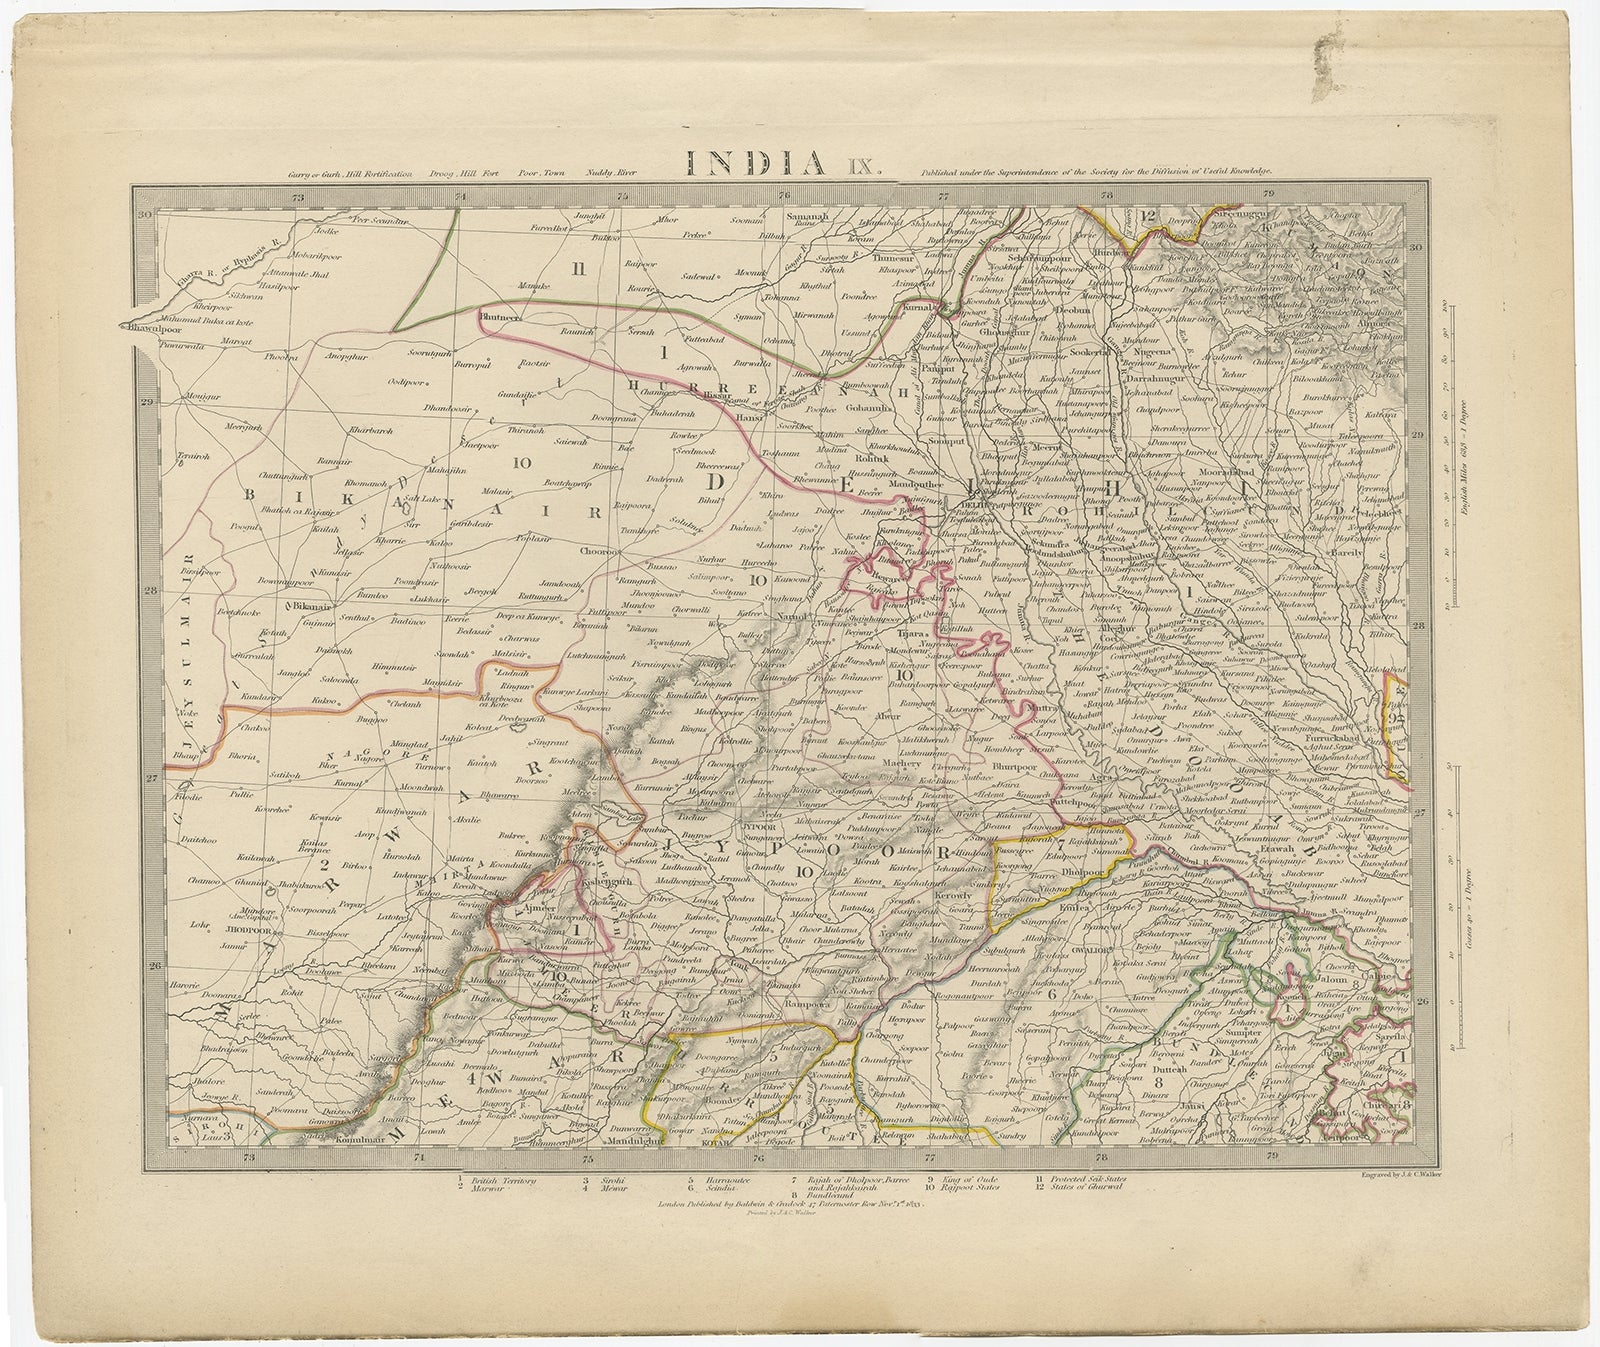 Antique map titled 'India IX'. Old steel engraved map of the region of Delhi, with great detail. 

Artists and Engravers: Engraved by J. & C. Walker. Published under the superintendence of the Society for the Diffusion of Useful Knowledge.